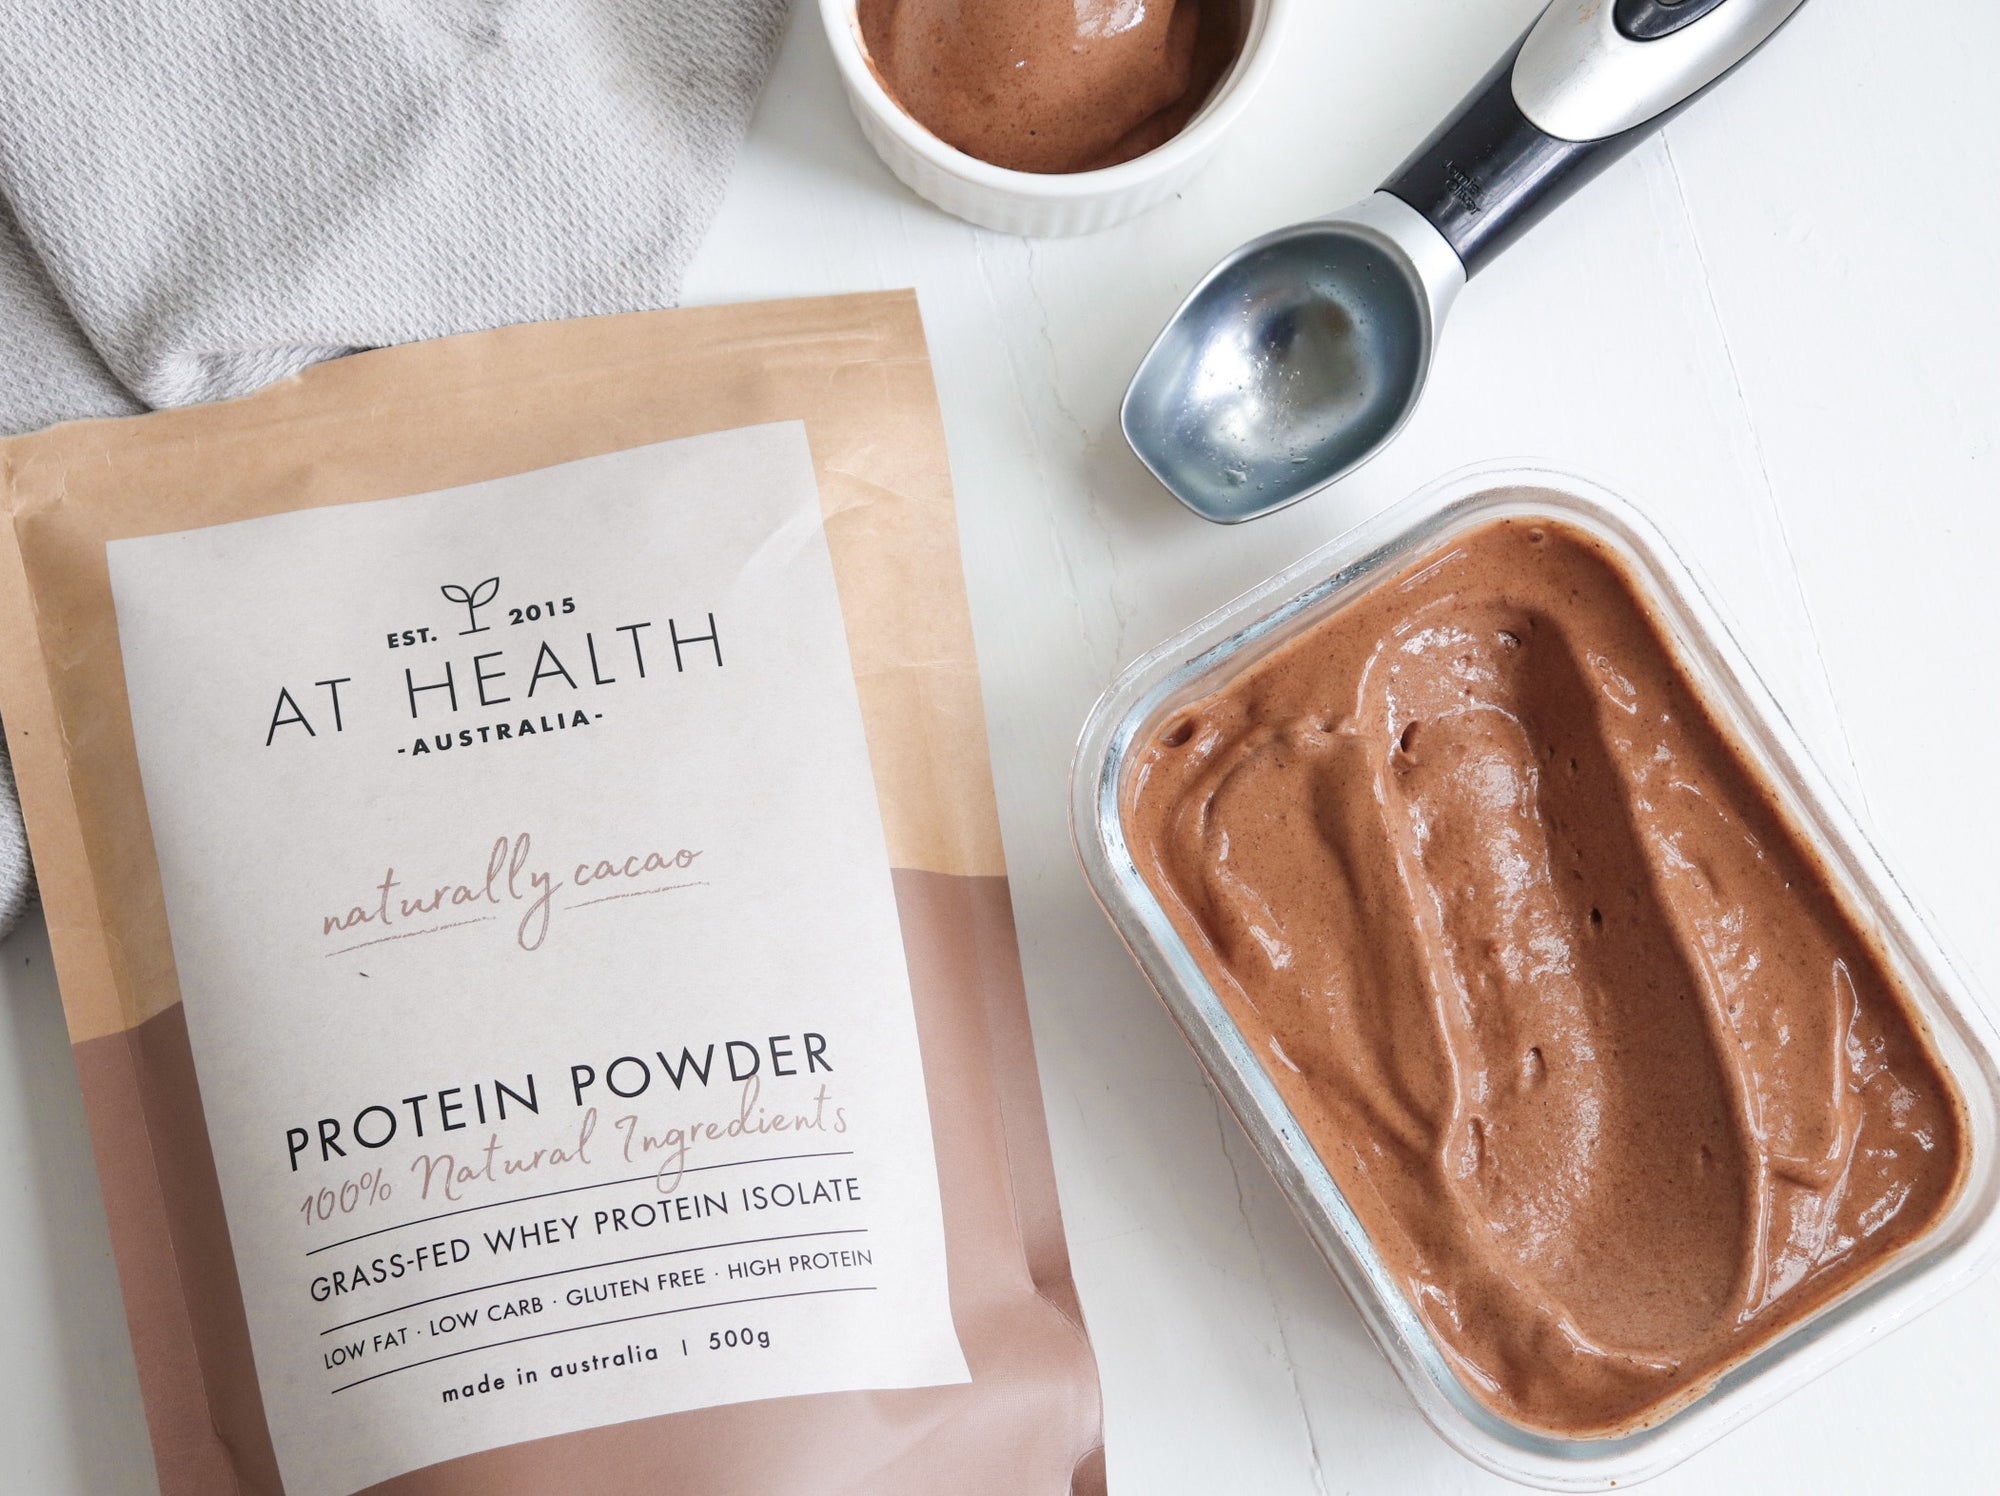 At Health Australia healthy protein ice cream is so delicious. Chocolate Protein icecream with no added sugars and low fat. At Health Protein Ice cream Australia is the best tasting healthy ice cream recipe using natural chocolate protein..